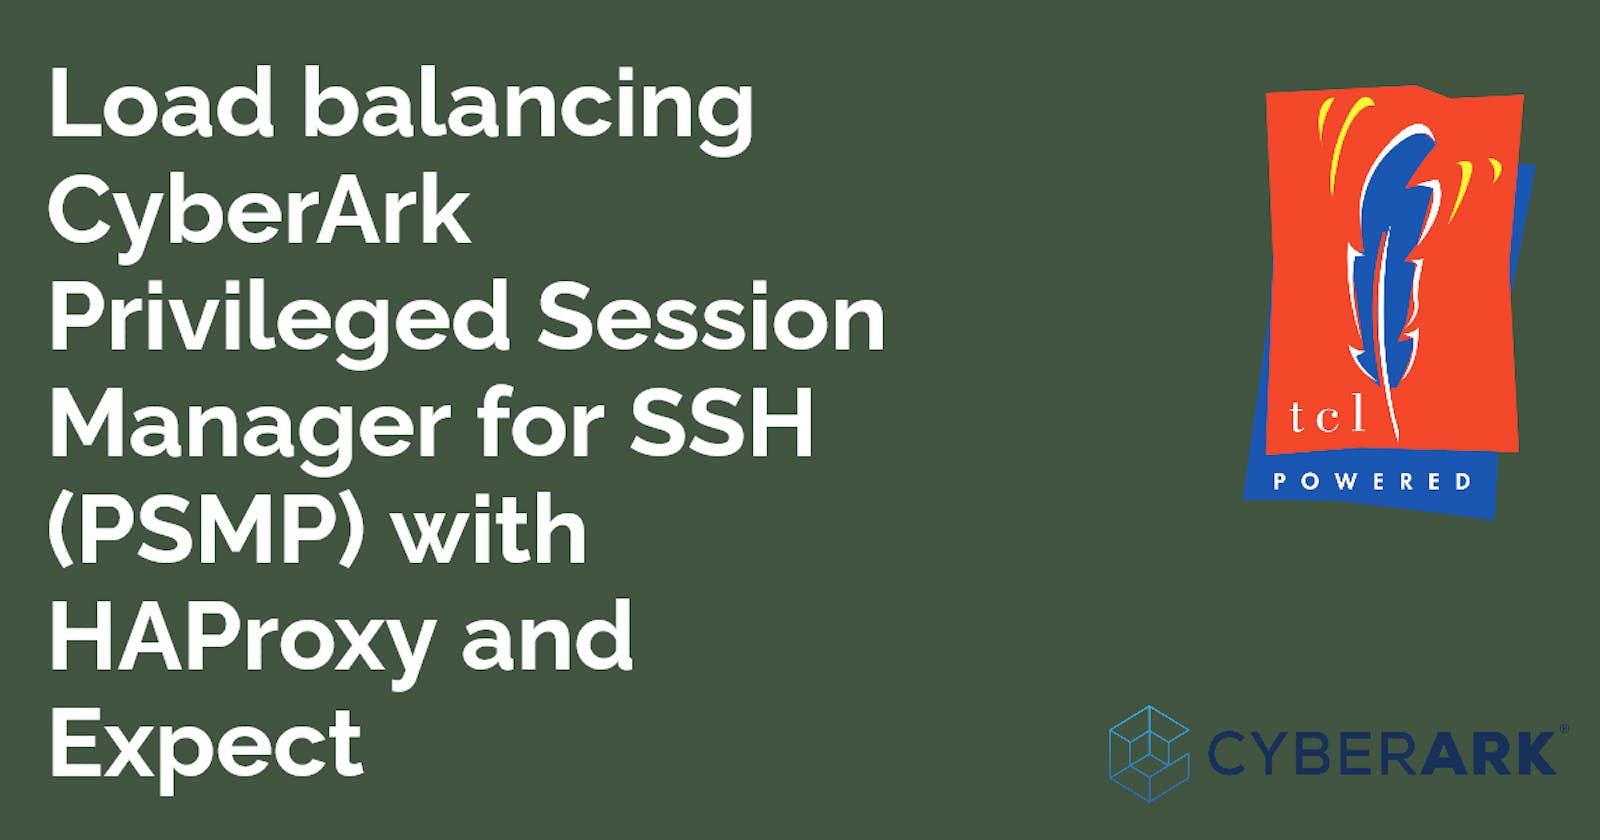 Load balancing CyberArk Privileged Session Manager for SSH (PSMP) with HAProxy and Expect